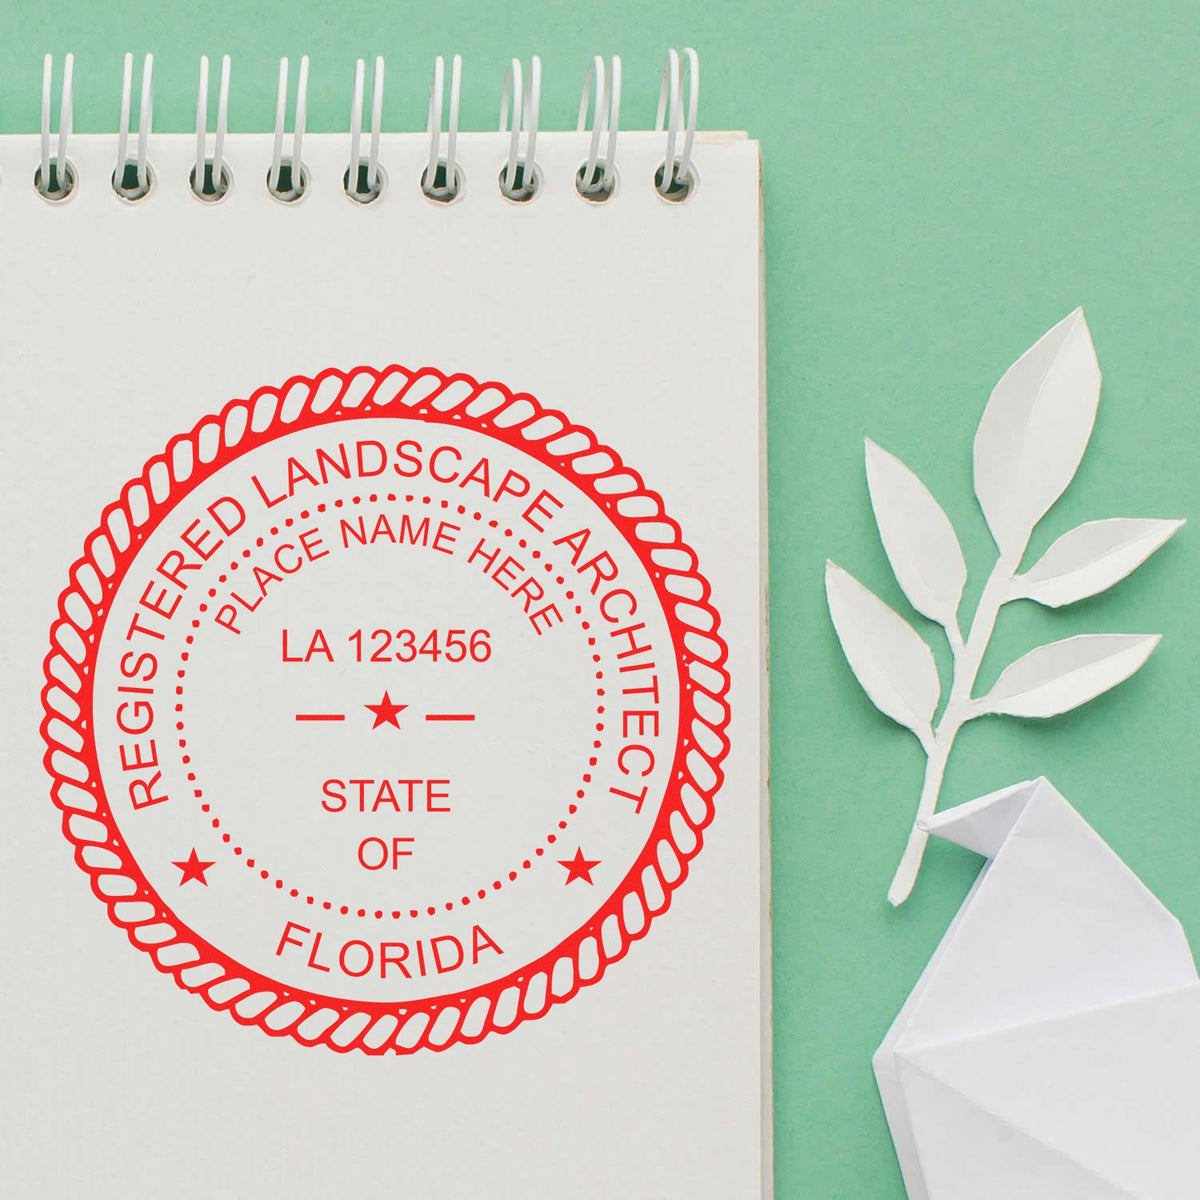 A stamped impression of the Slim Pre-Inked Florida Landscape Architect Seal Stamp in this stylish lifestyle photo, setting the tone for a unique and personalized product.